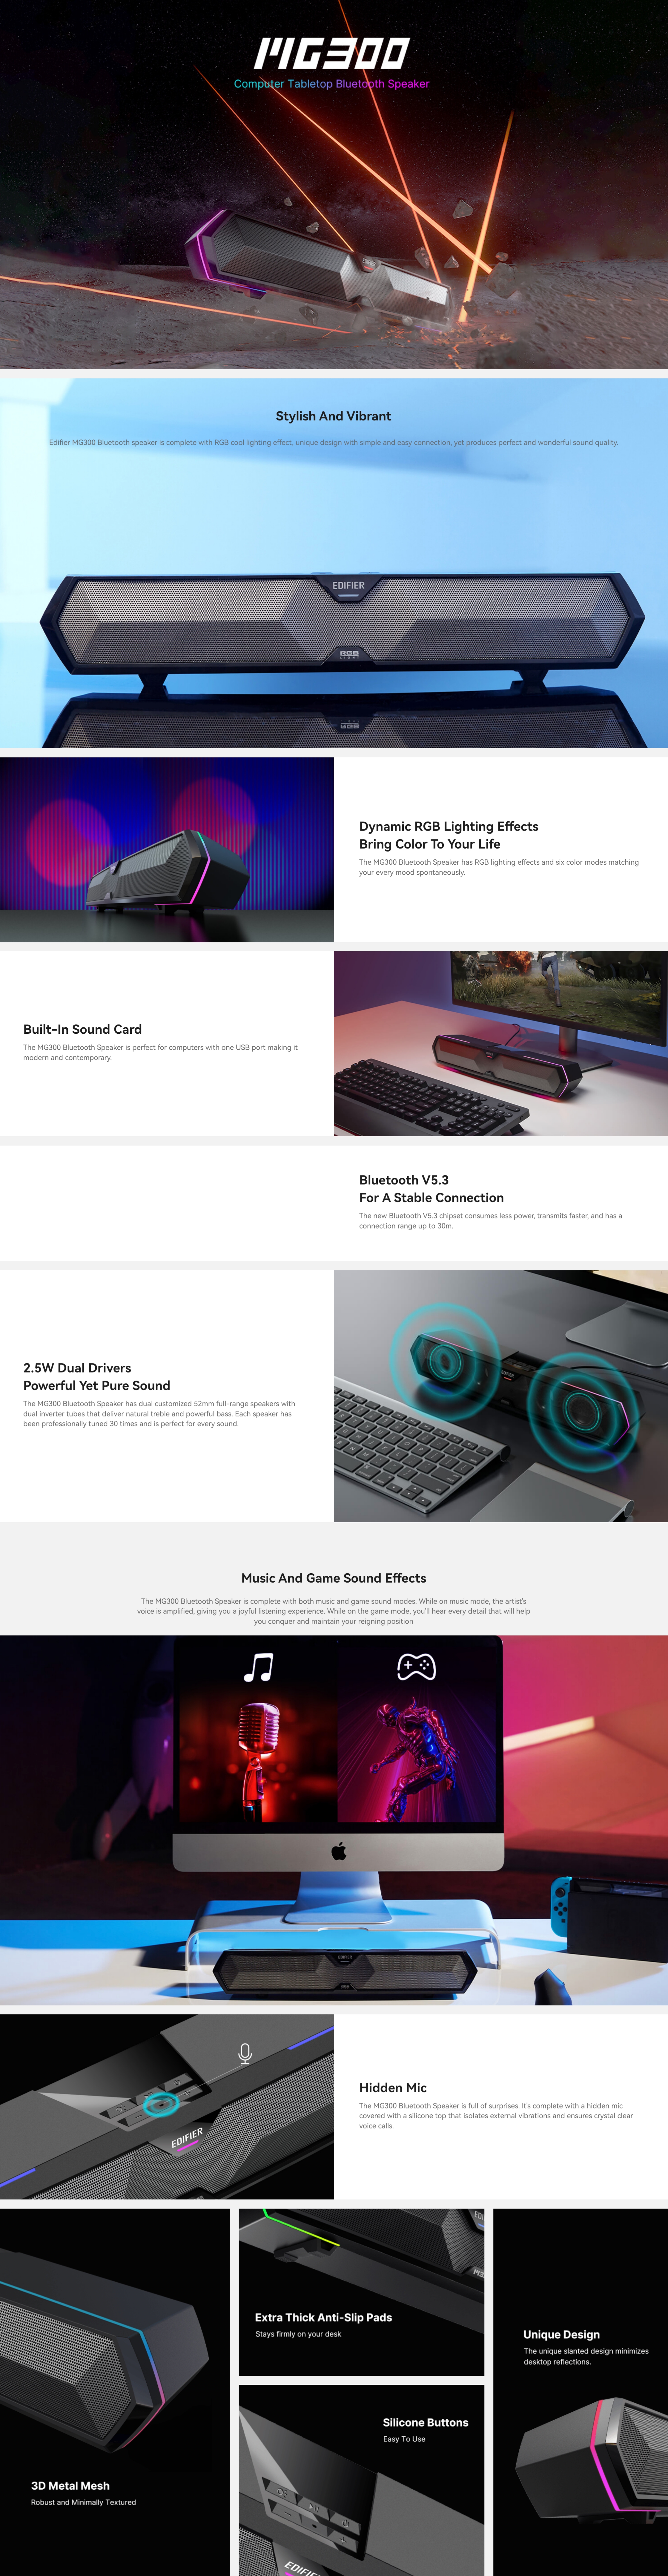 A large marketing image providing additional information about the product Edifier MG300 Computer Tabletop RGB Bluetooth Speaker - Additional alt info not provided